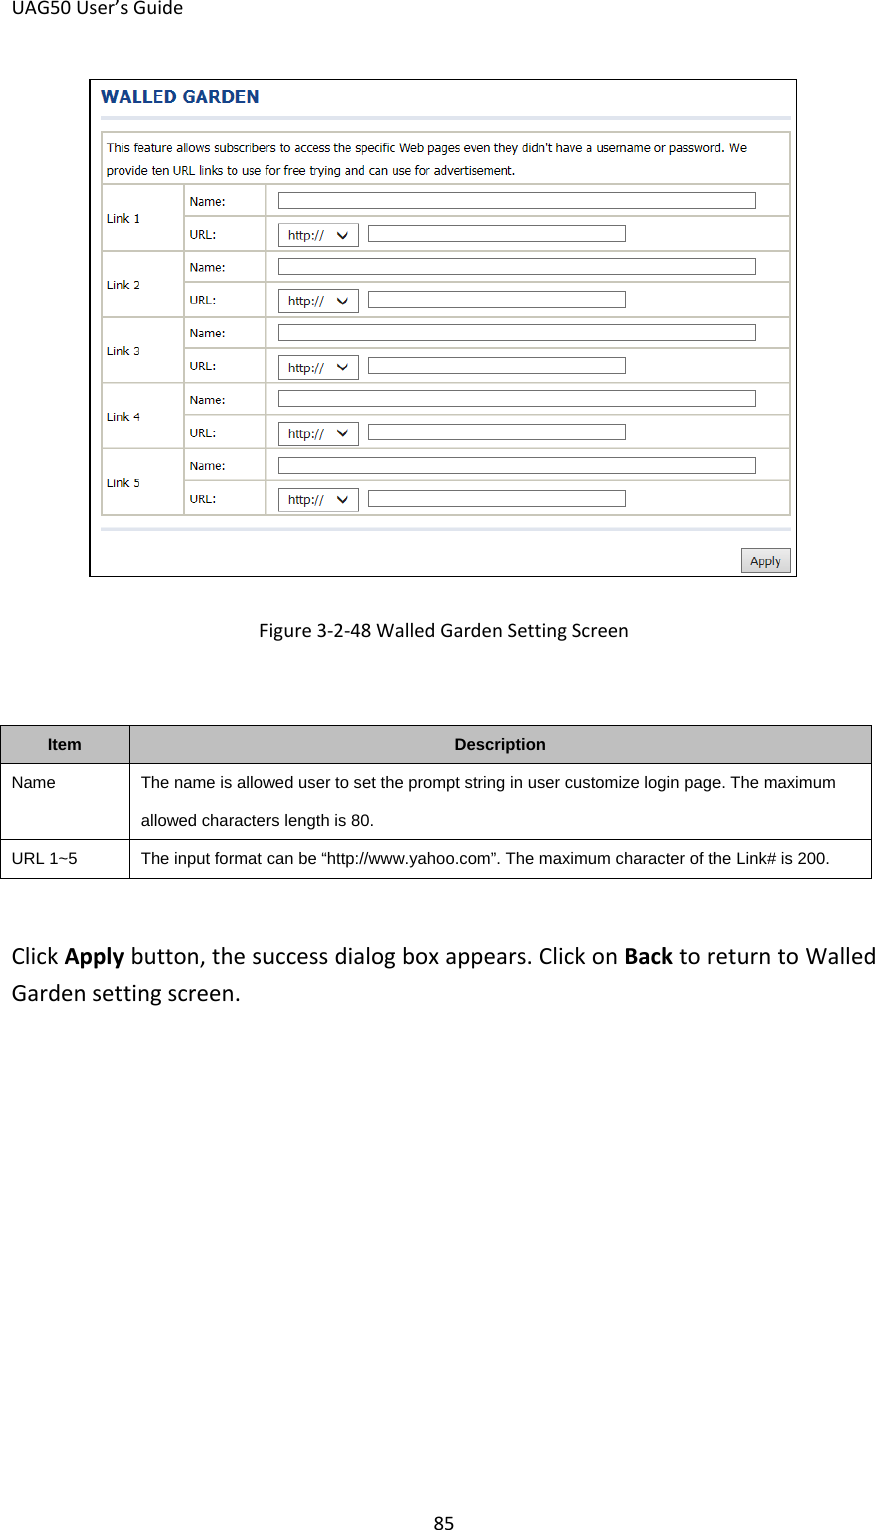 UAG50 User’s Guide 85  Figure 3-2-48 Walled Garden Setting Screen  Item Description Name The name is allowed user to set the prompt string in user customize login page. The maximum allowed characters length is 80. URL 1~5  The input format can be “http://www.yahoo.com”. The maximum character of the Link# is 200.  Click Apply button, the success dialog box appears. Click on Back to return to Walled Garden setting screen.   